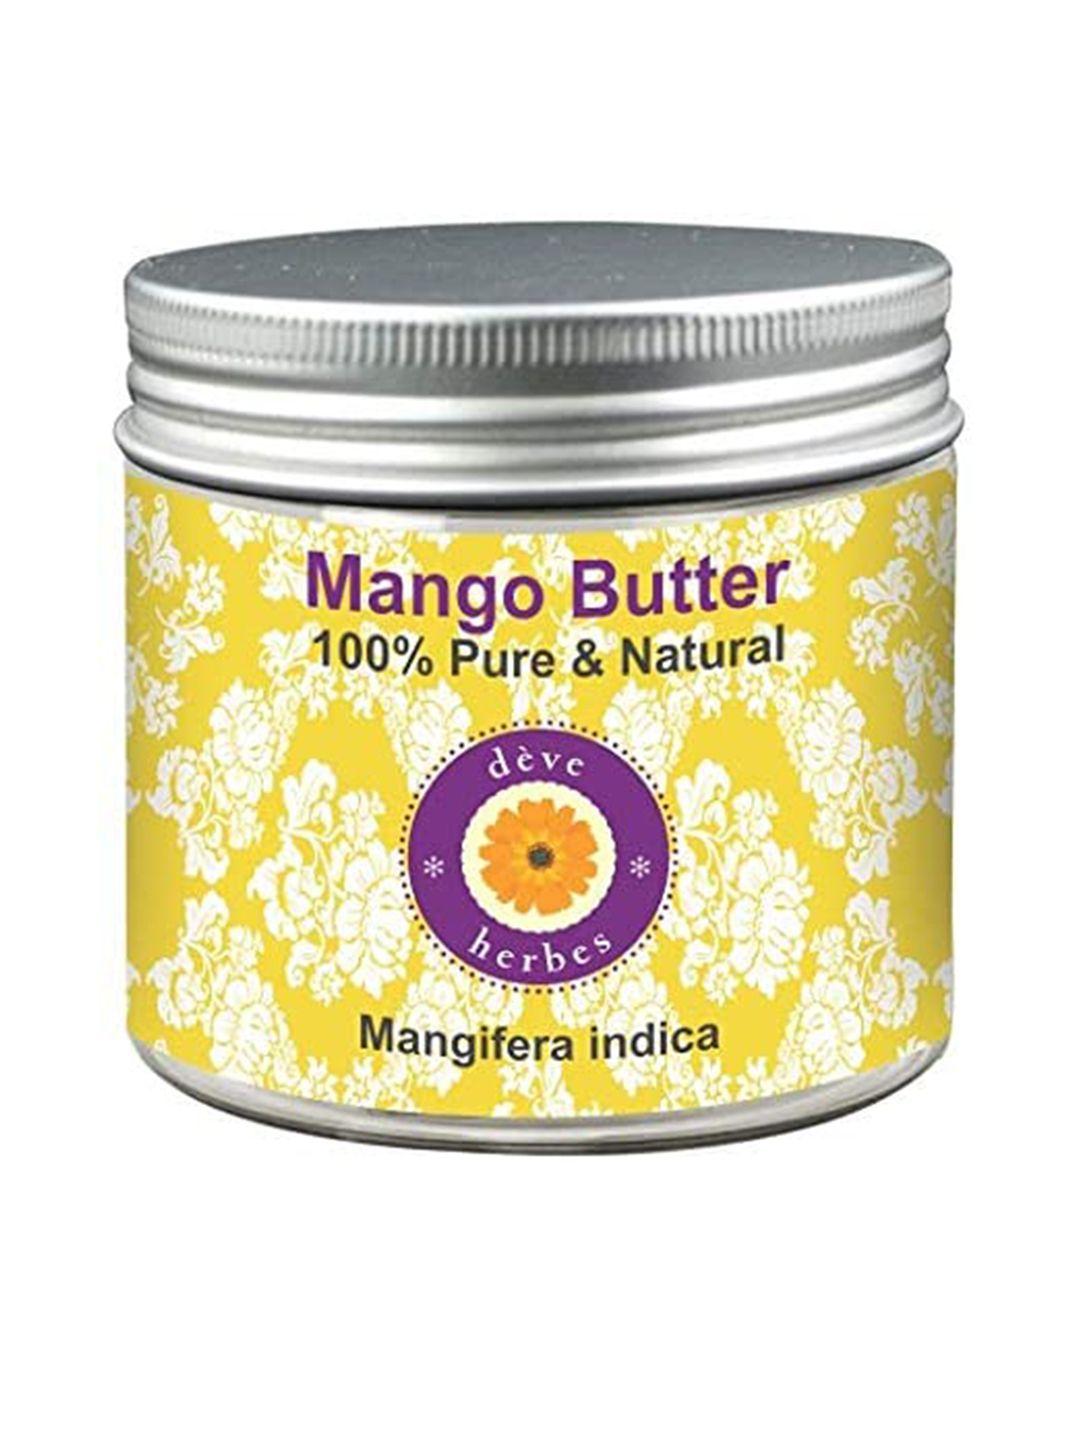 deve herbes natural therapeutic grade pure mango body butter - 50g